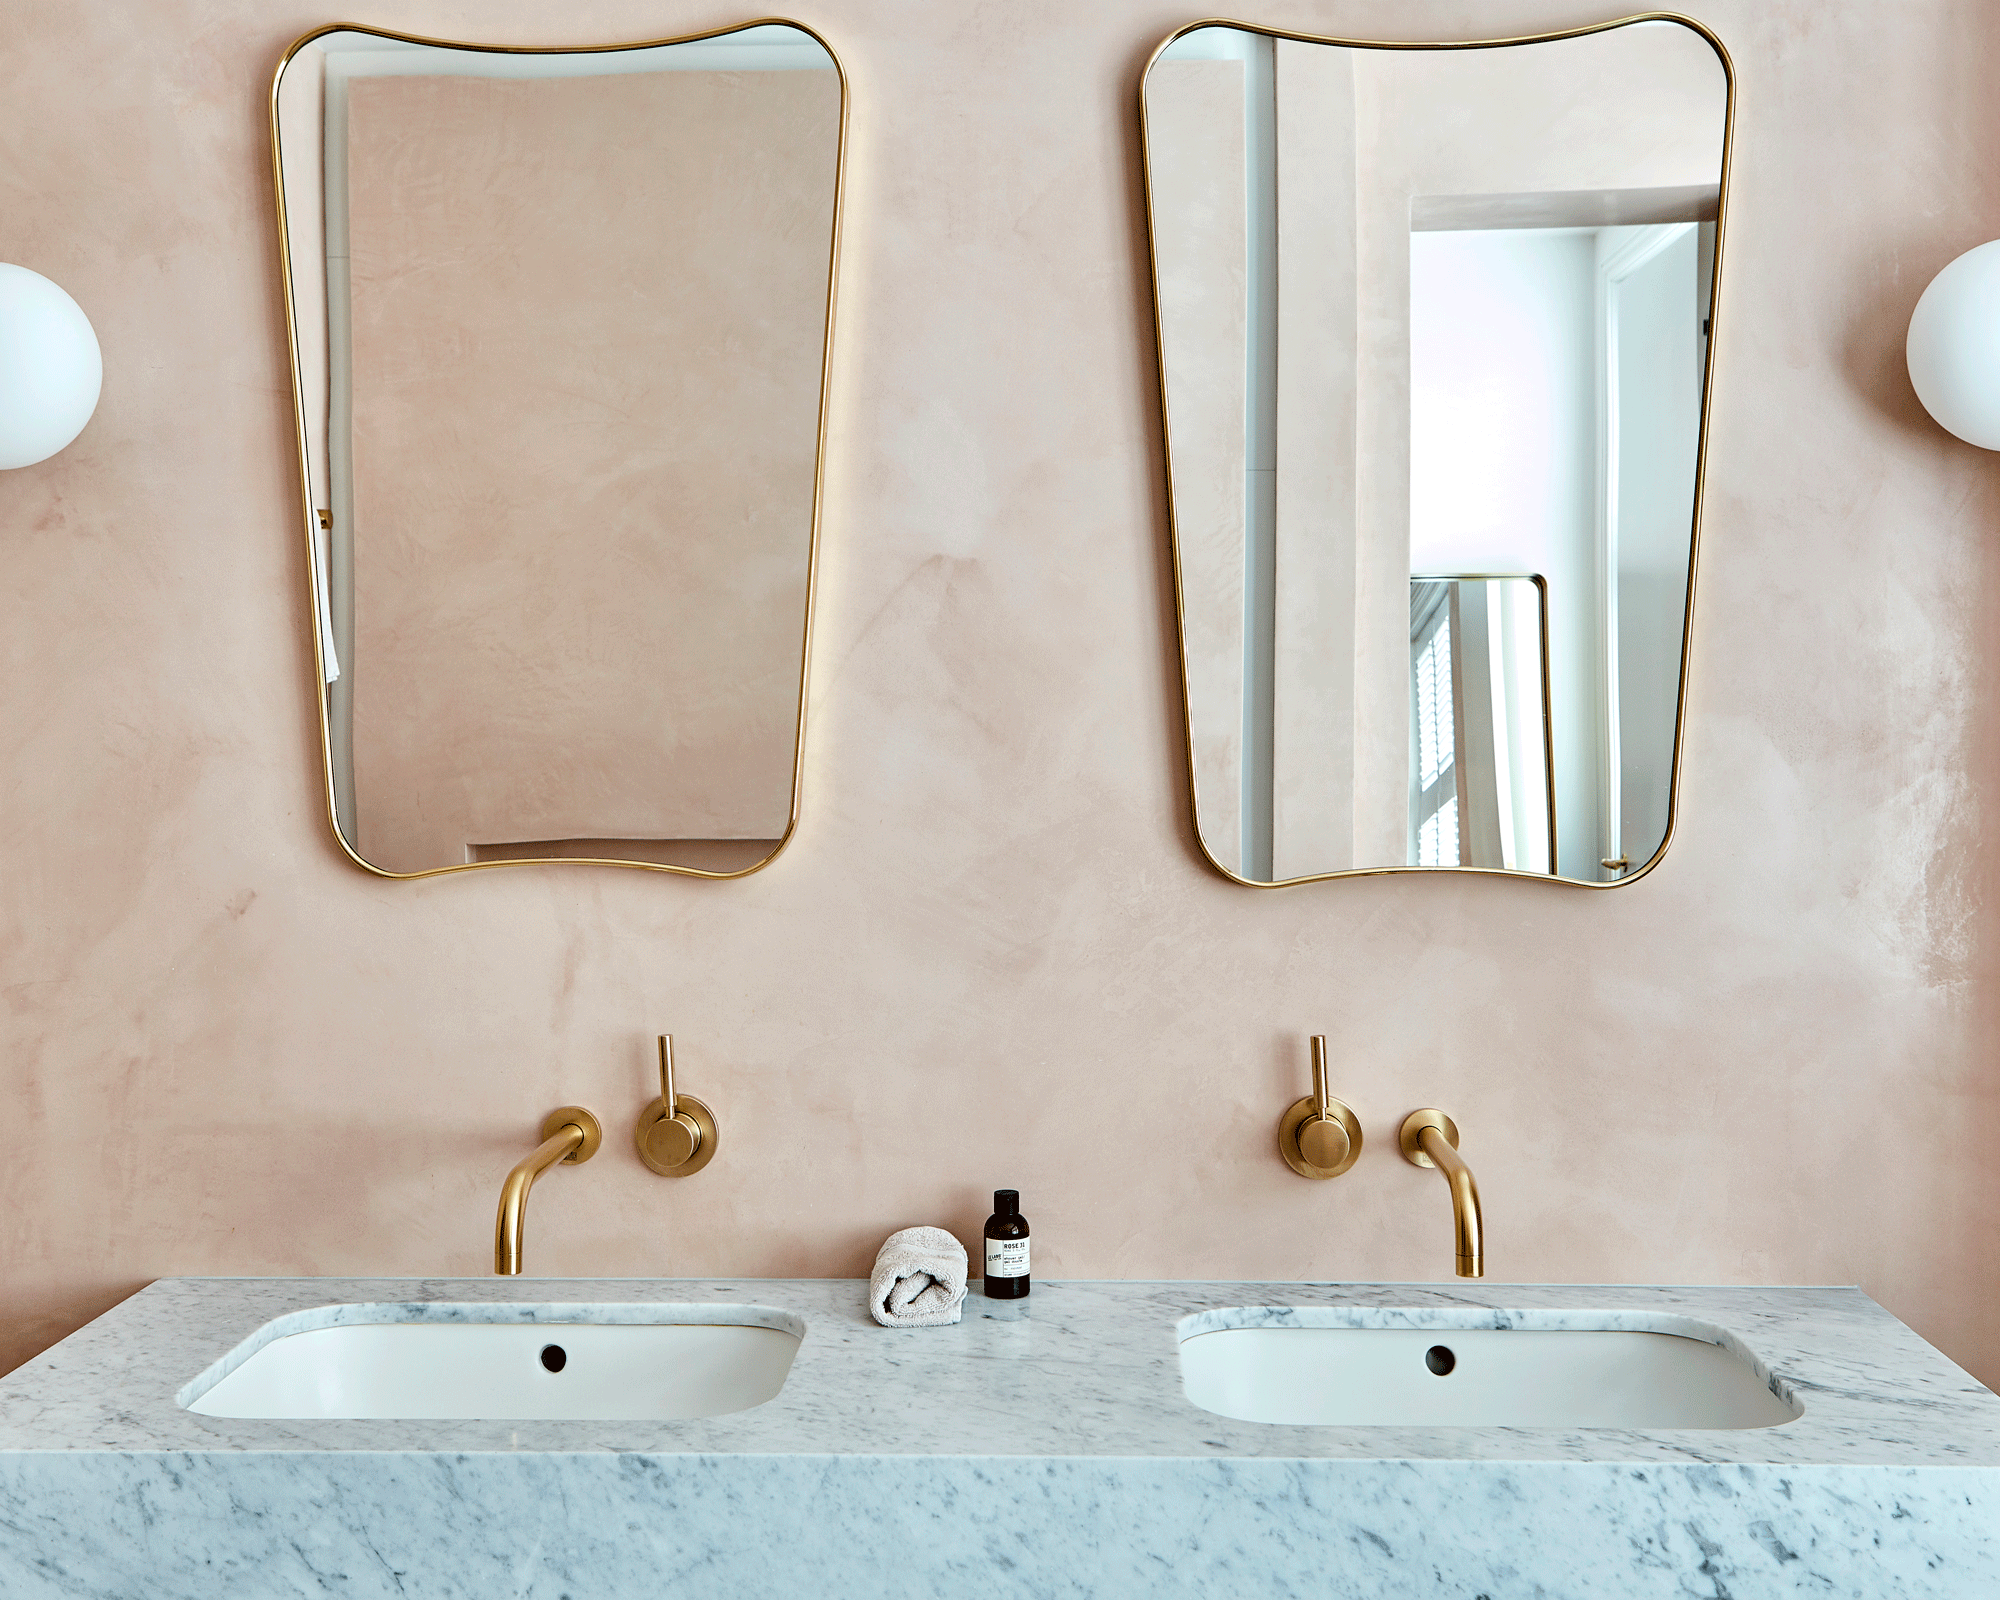 An undermounted double vanity unit with gold faucets and matching mirrors against a pink wall